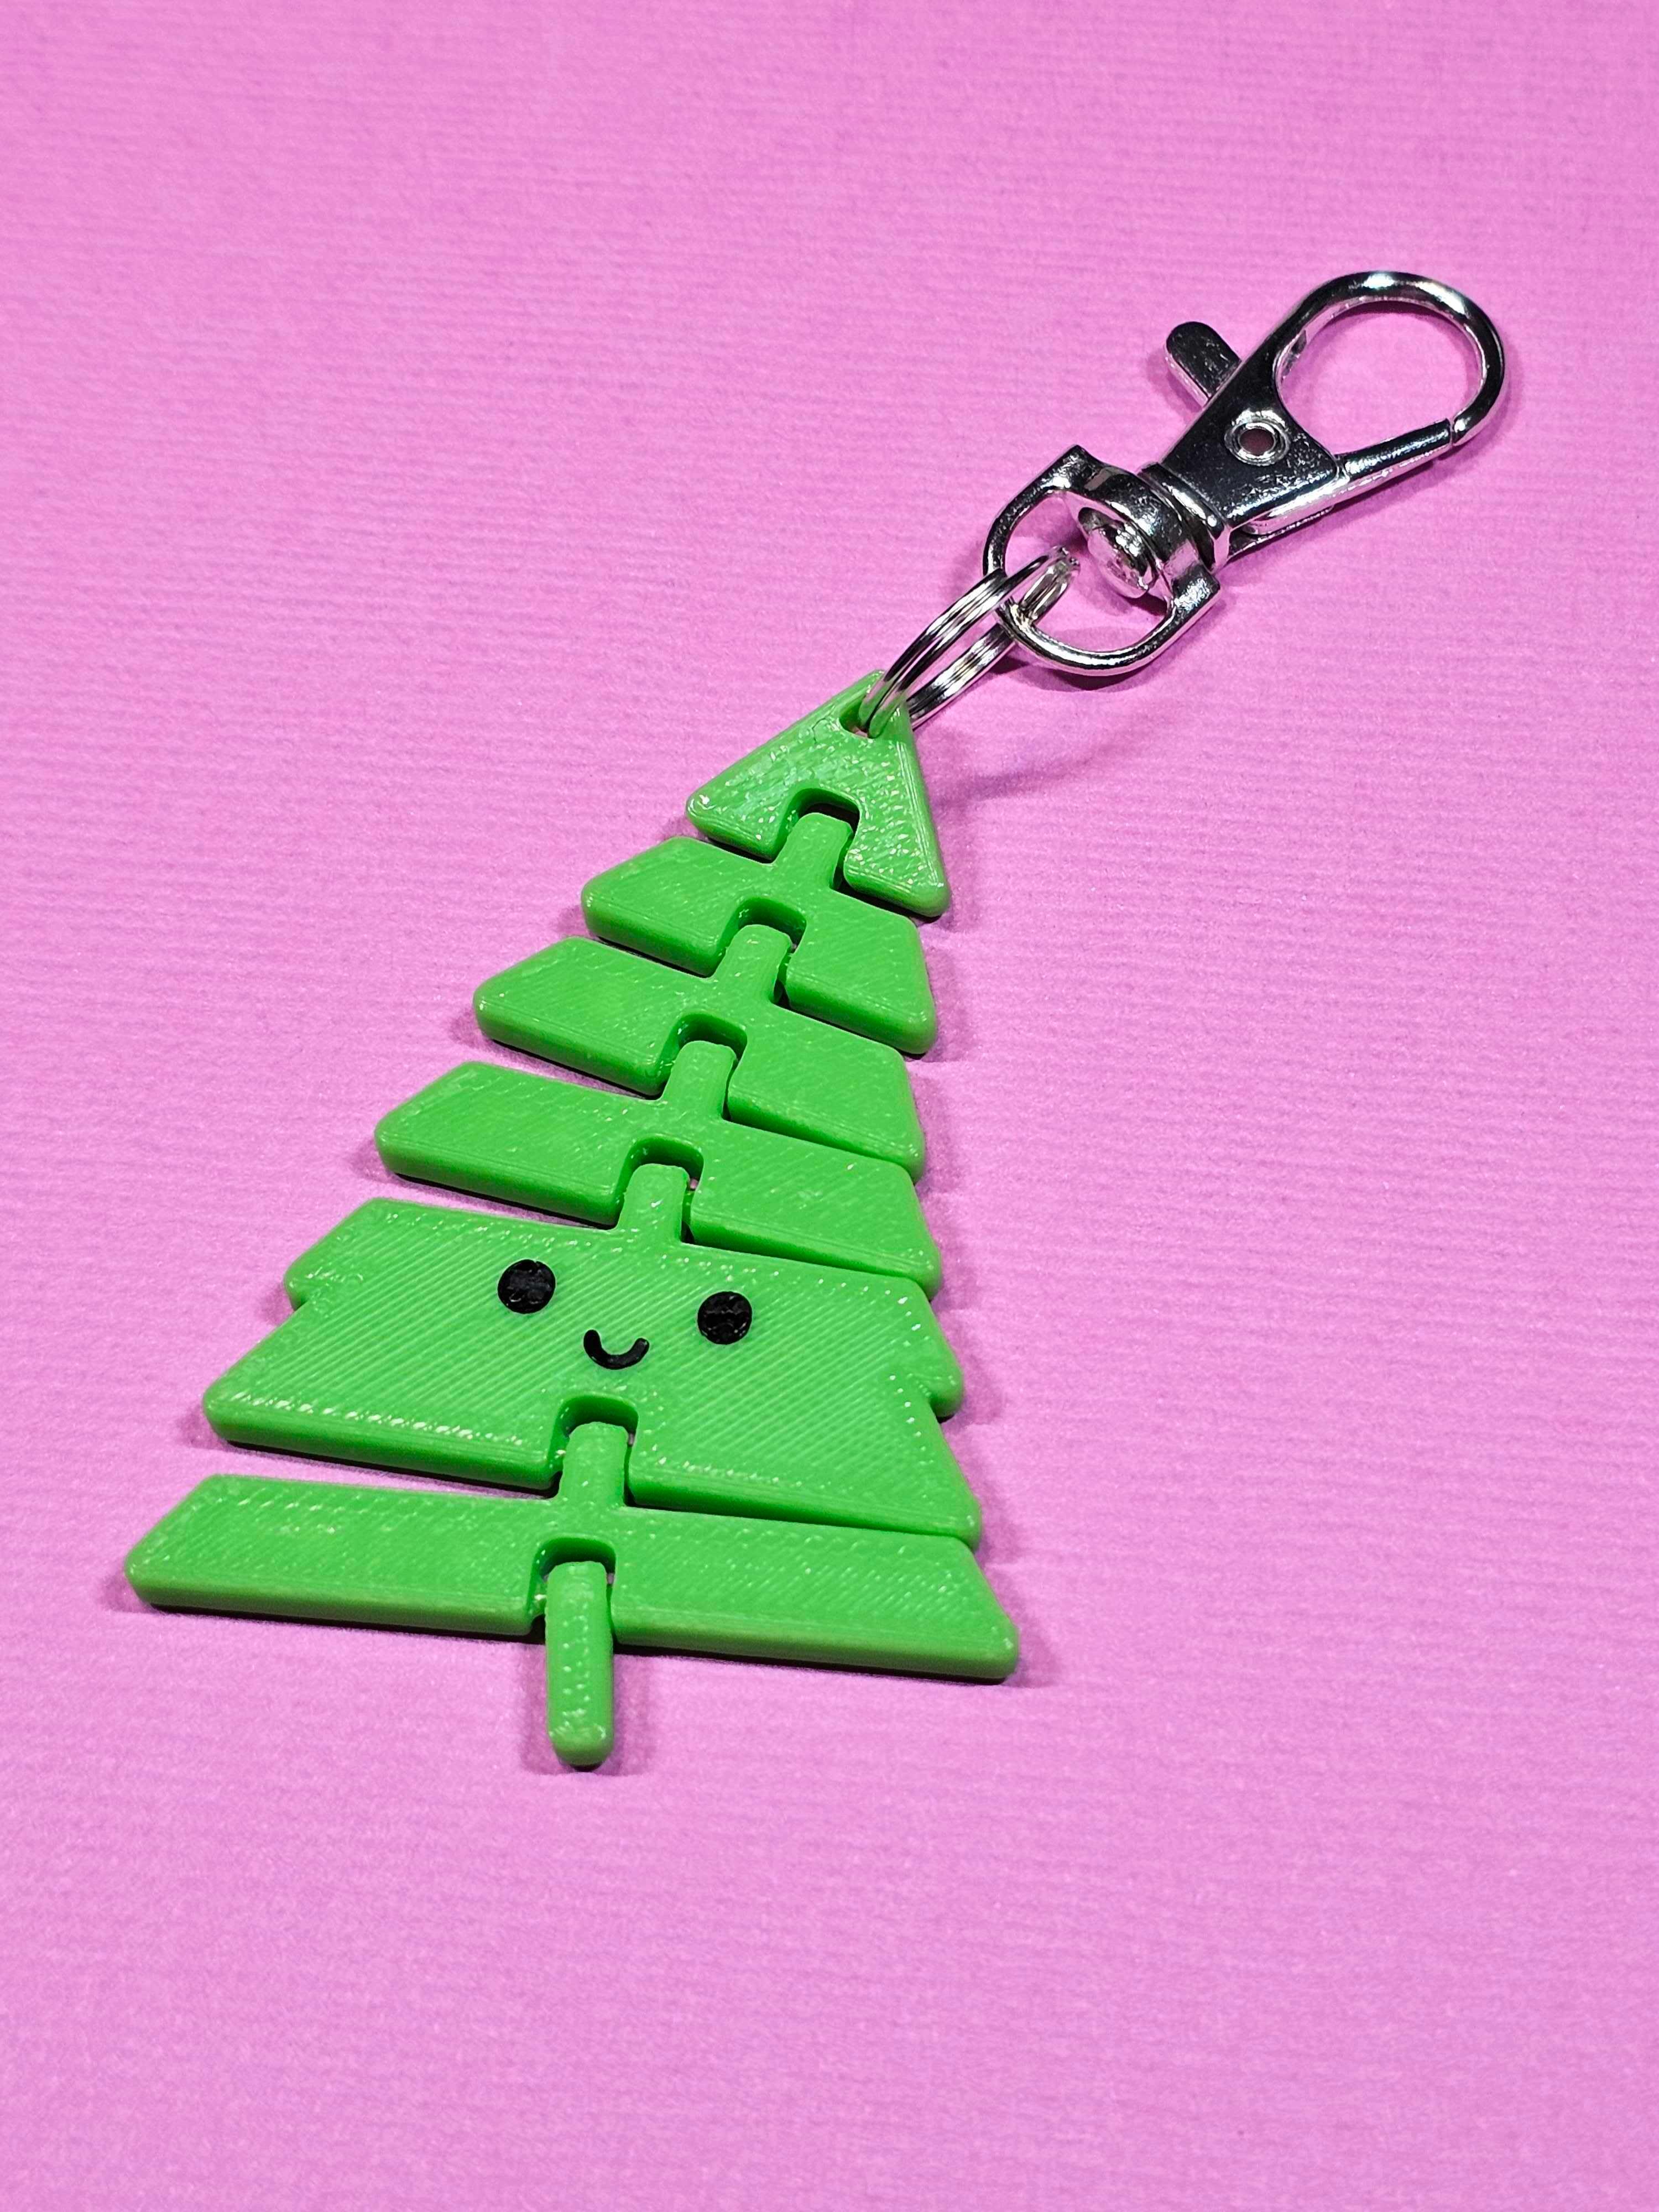 Articulated Kawaii Christmas Tree Keychain - Print in place fidget toy - 3mf 3d model